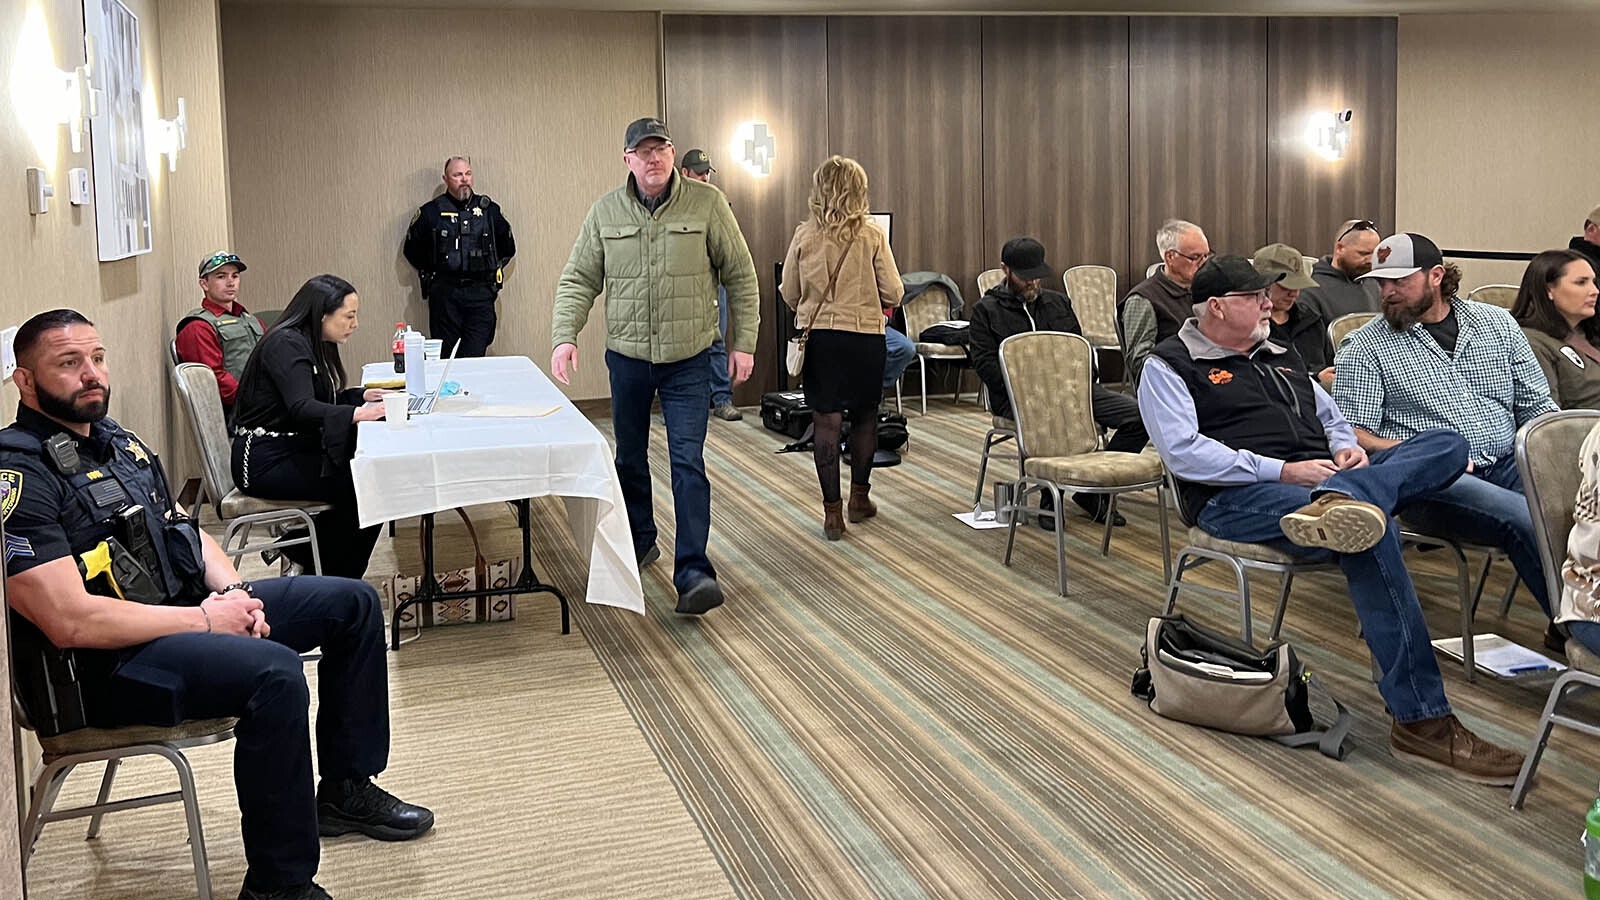 Law enforcement officers from several agencies, along with Game and Fish Wardens, provided security at a meeting of the Wyoming Game and Fish Commission meeting Wednesday in Riverton.